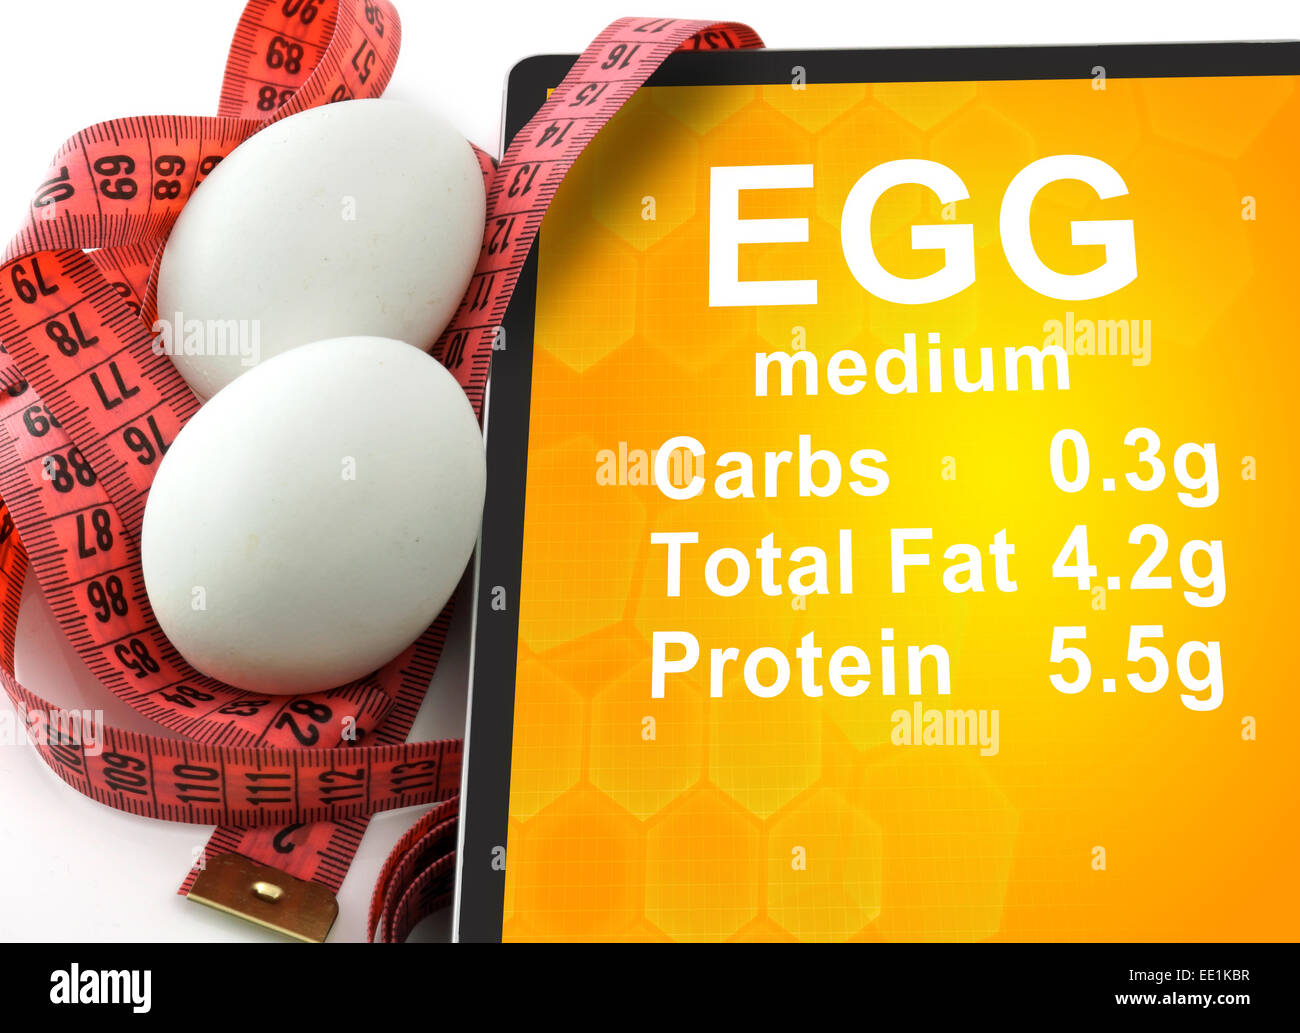 Tablet with Calories In egg  and measuring tape on white background. nutrition facts Stock Photo